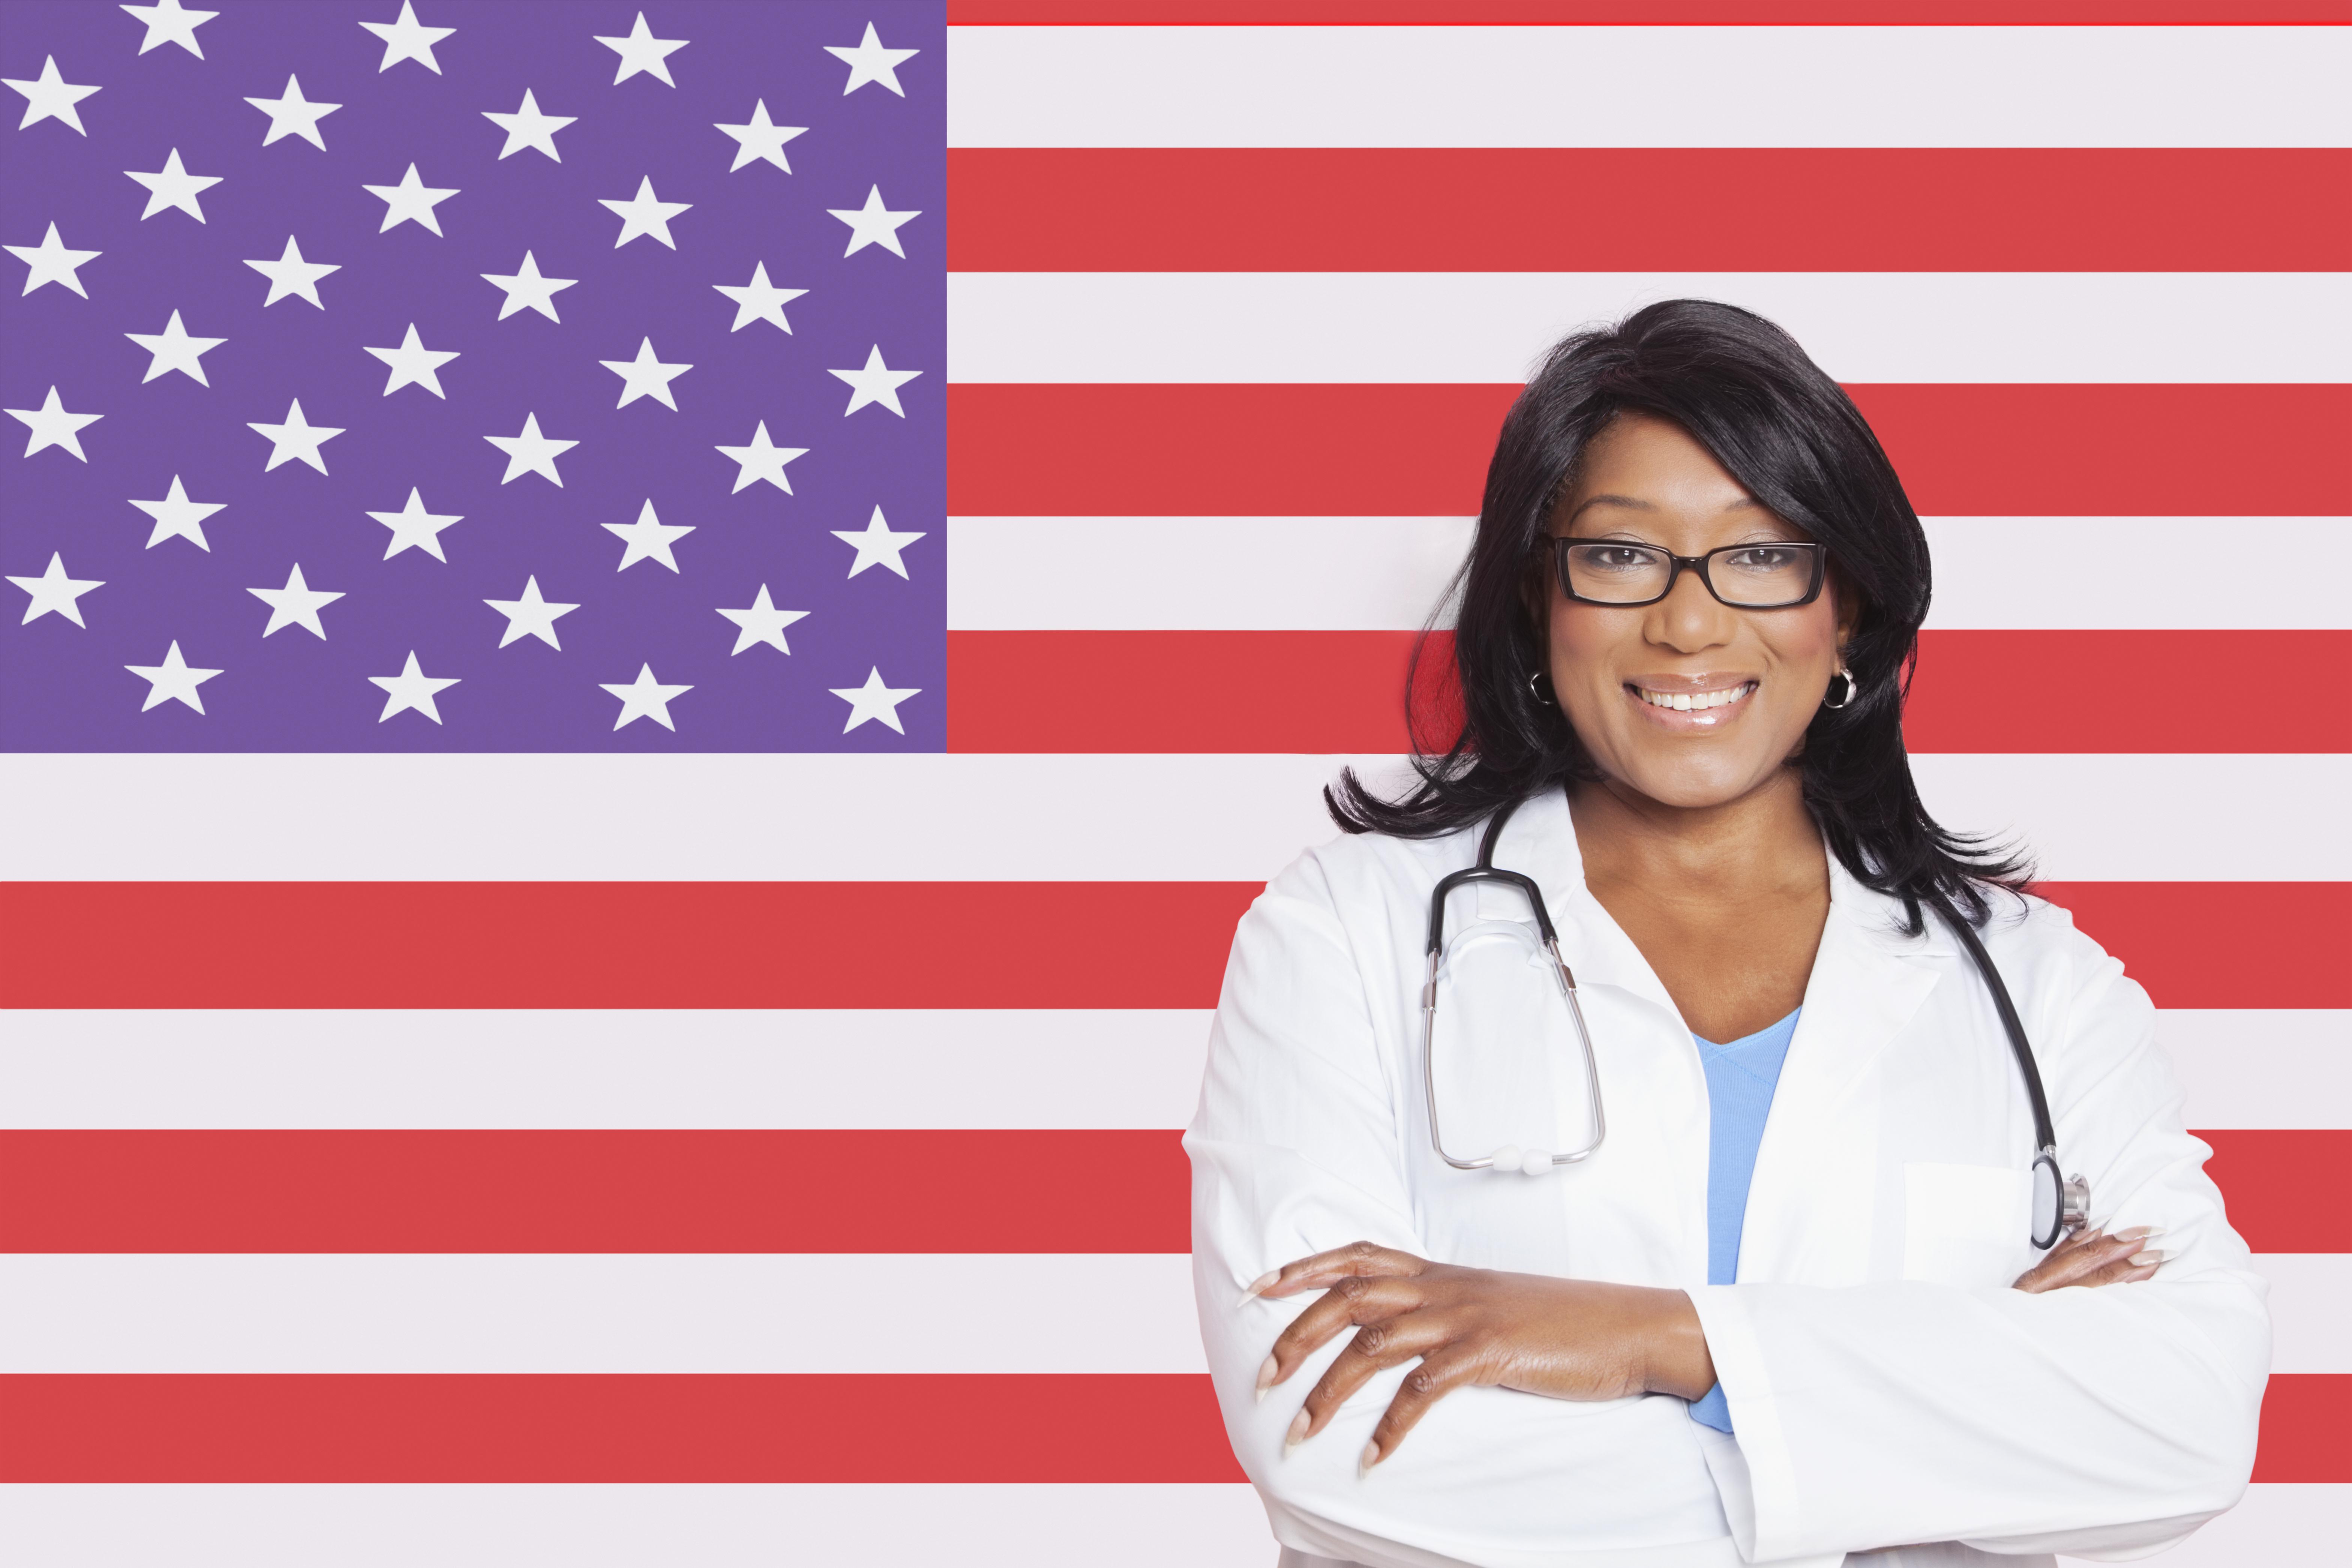 Portrait of confident mixed race female surgeon over American flag